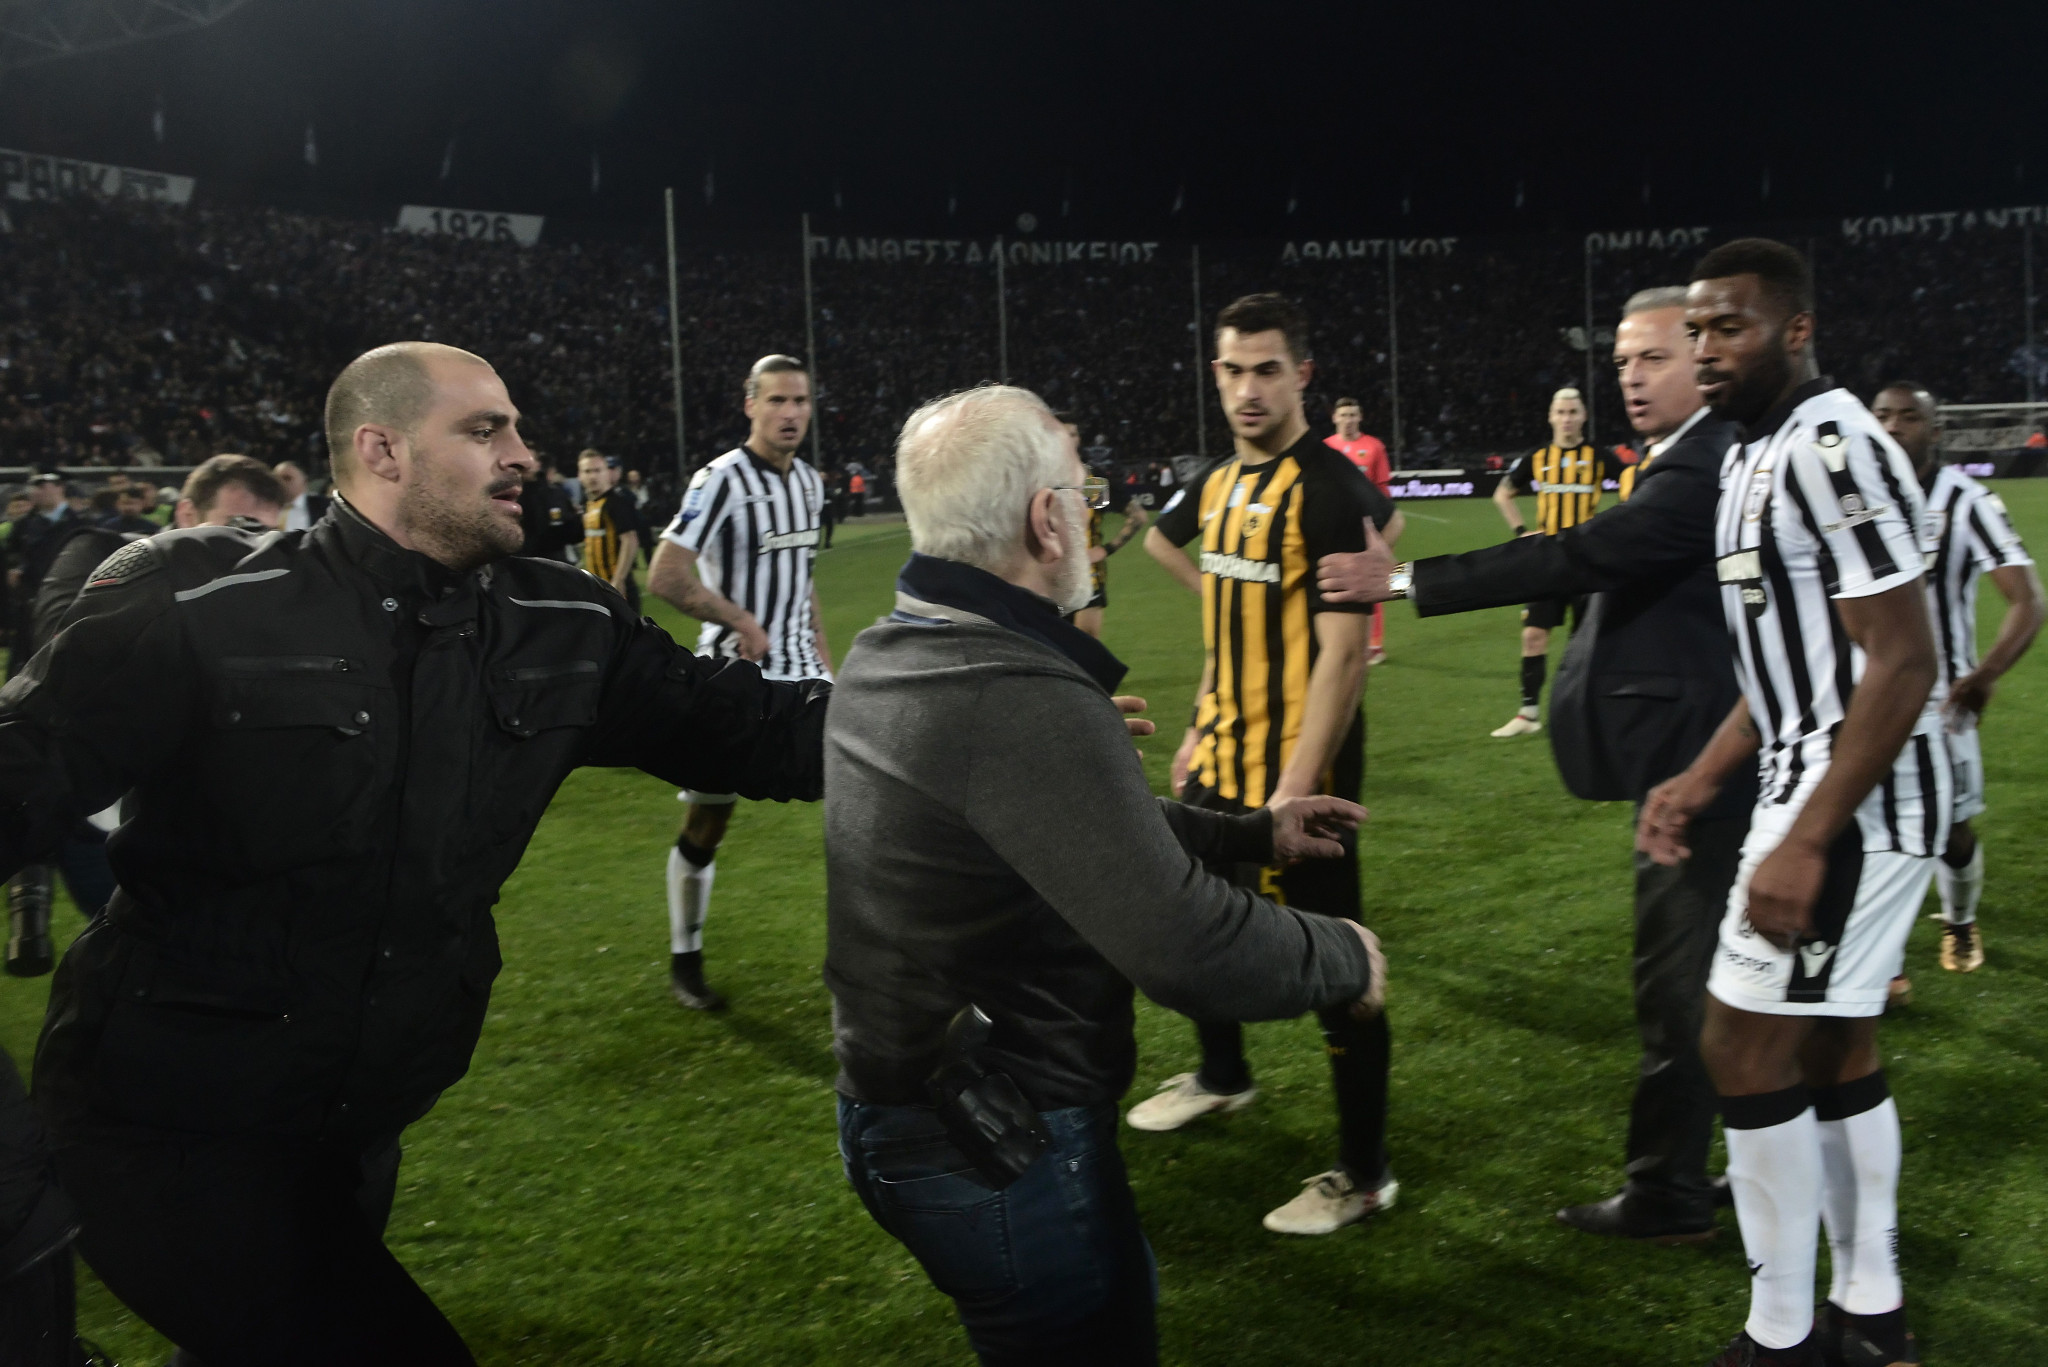 FIFA hold emergency talks in Greece after PAOK owner storms pitch armed with handgun